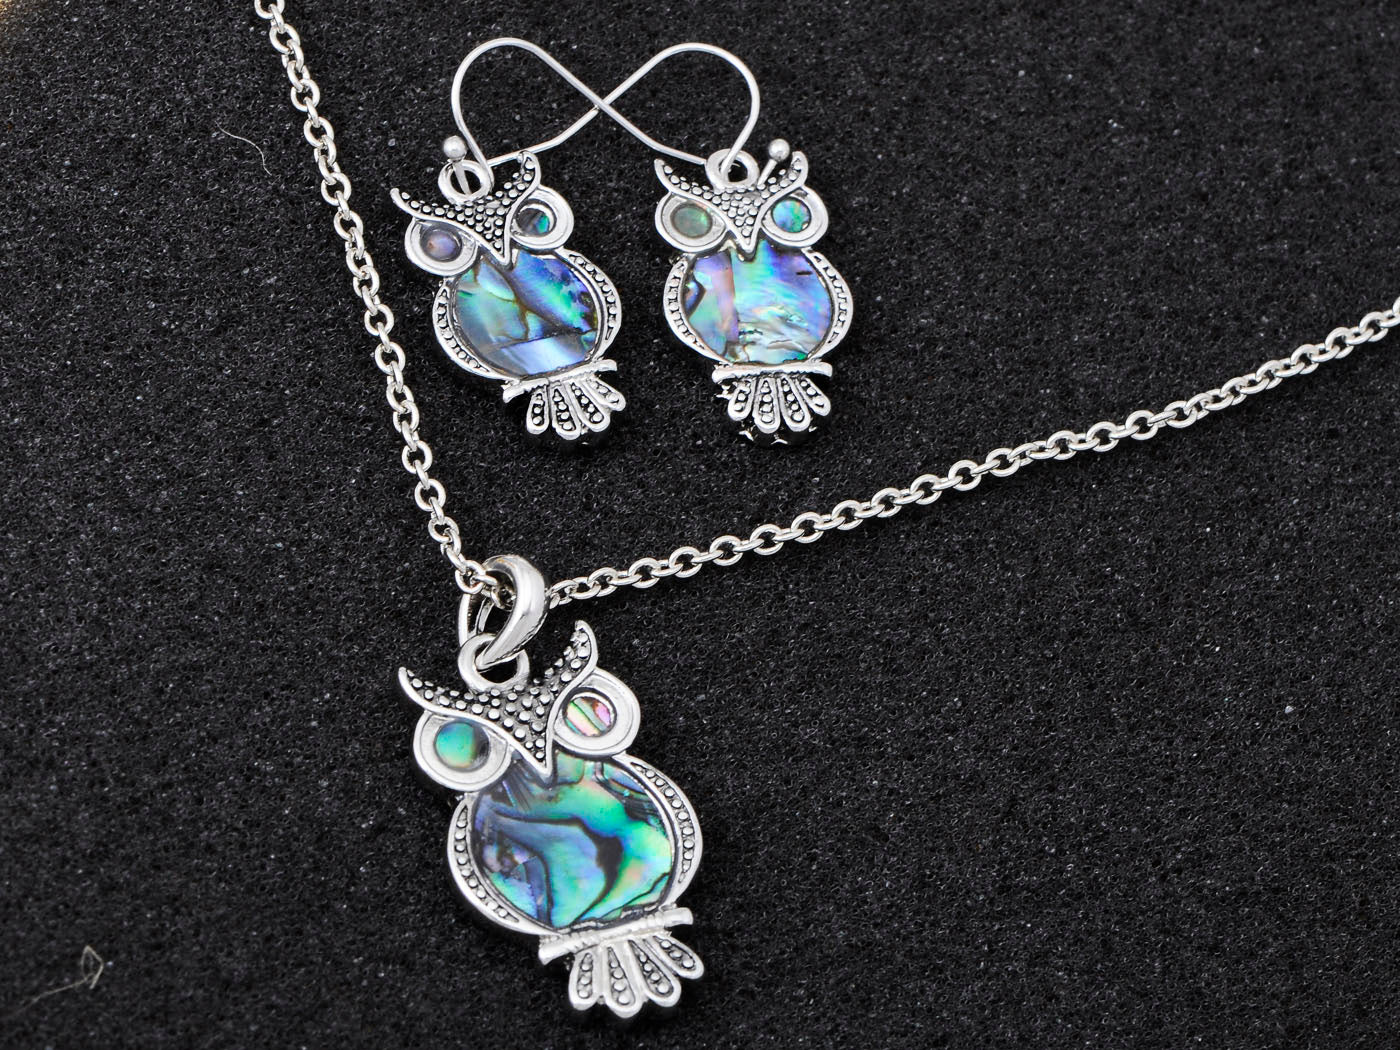 Abalone Colored Owl Bird Necklace Earrings Set